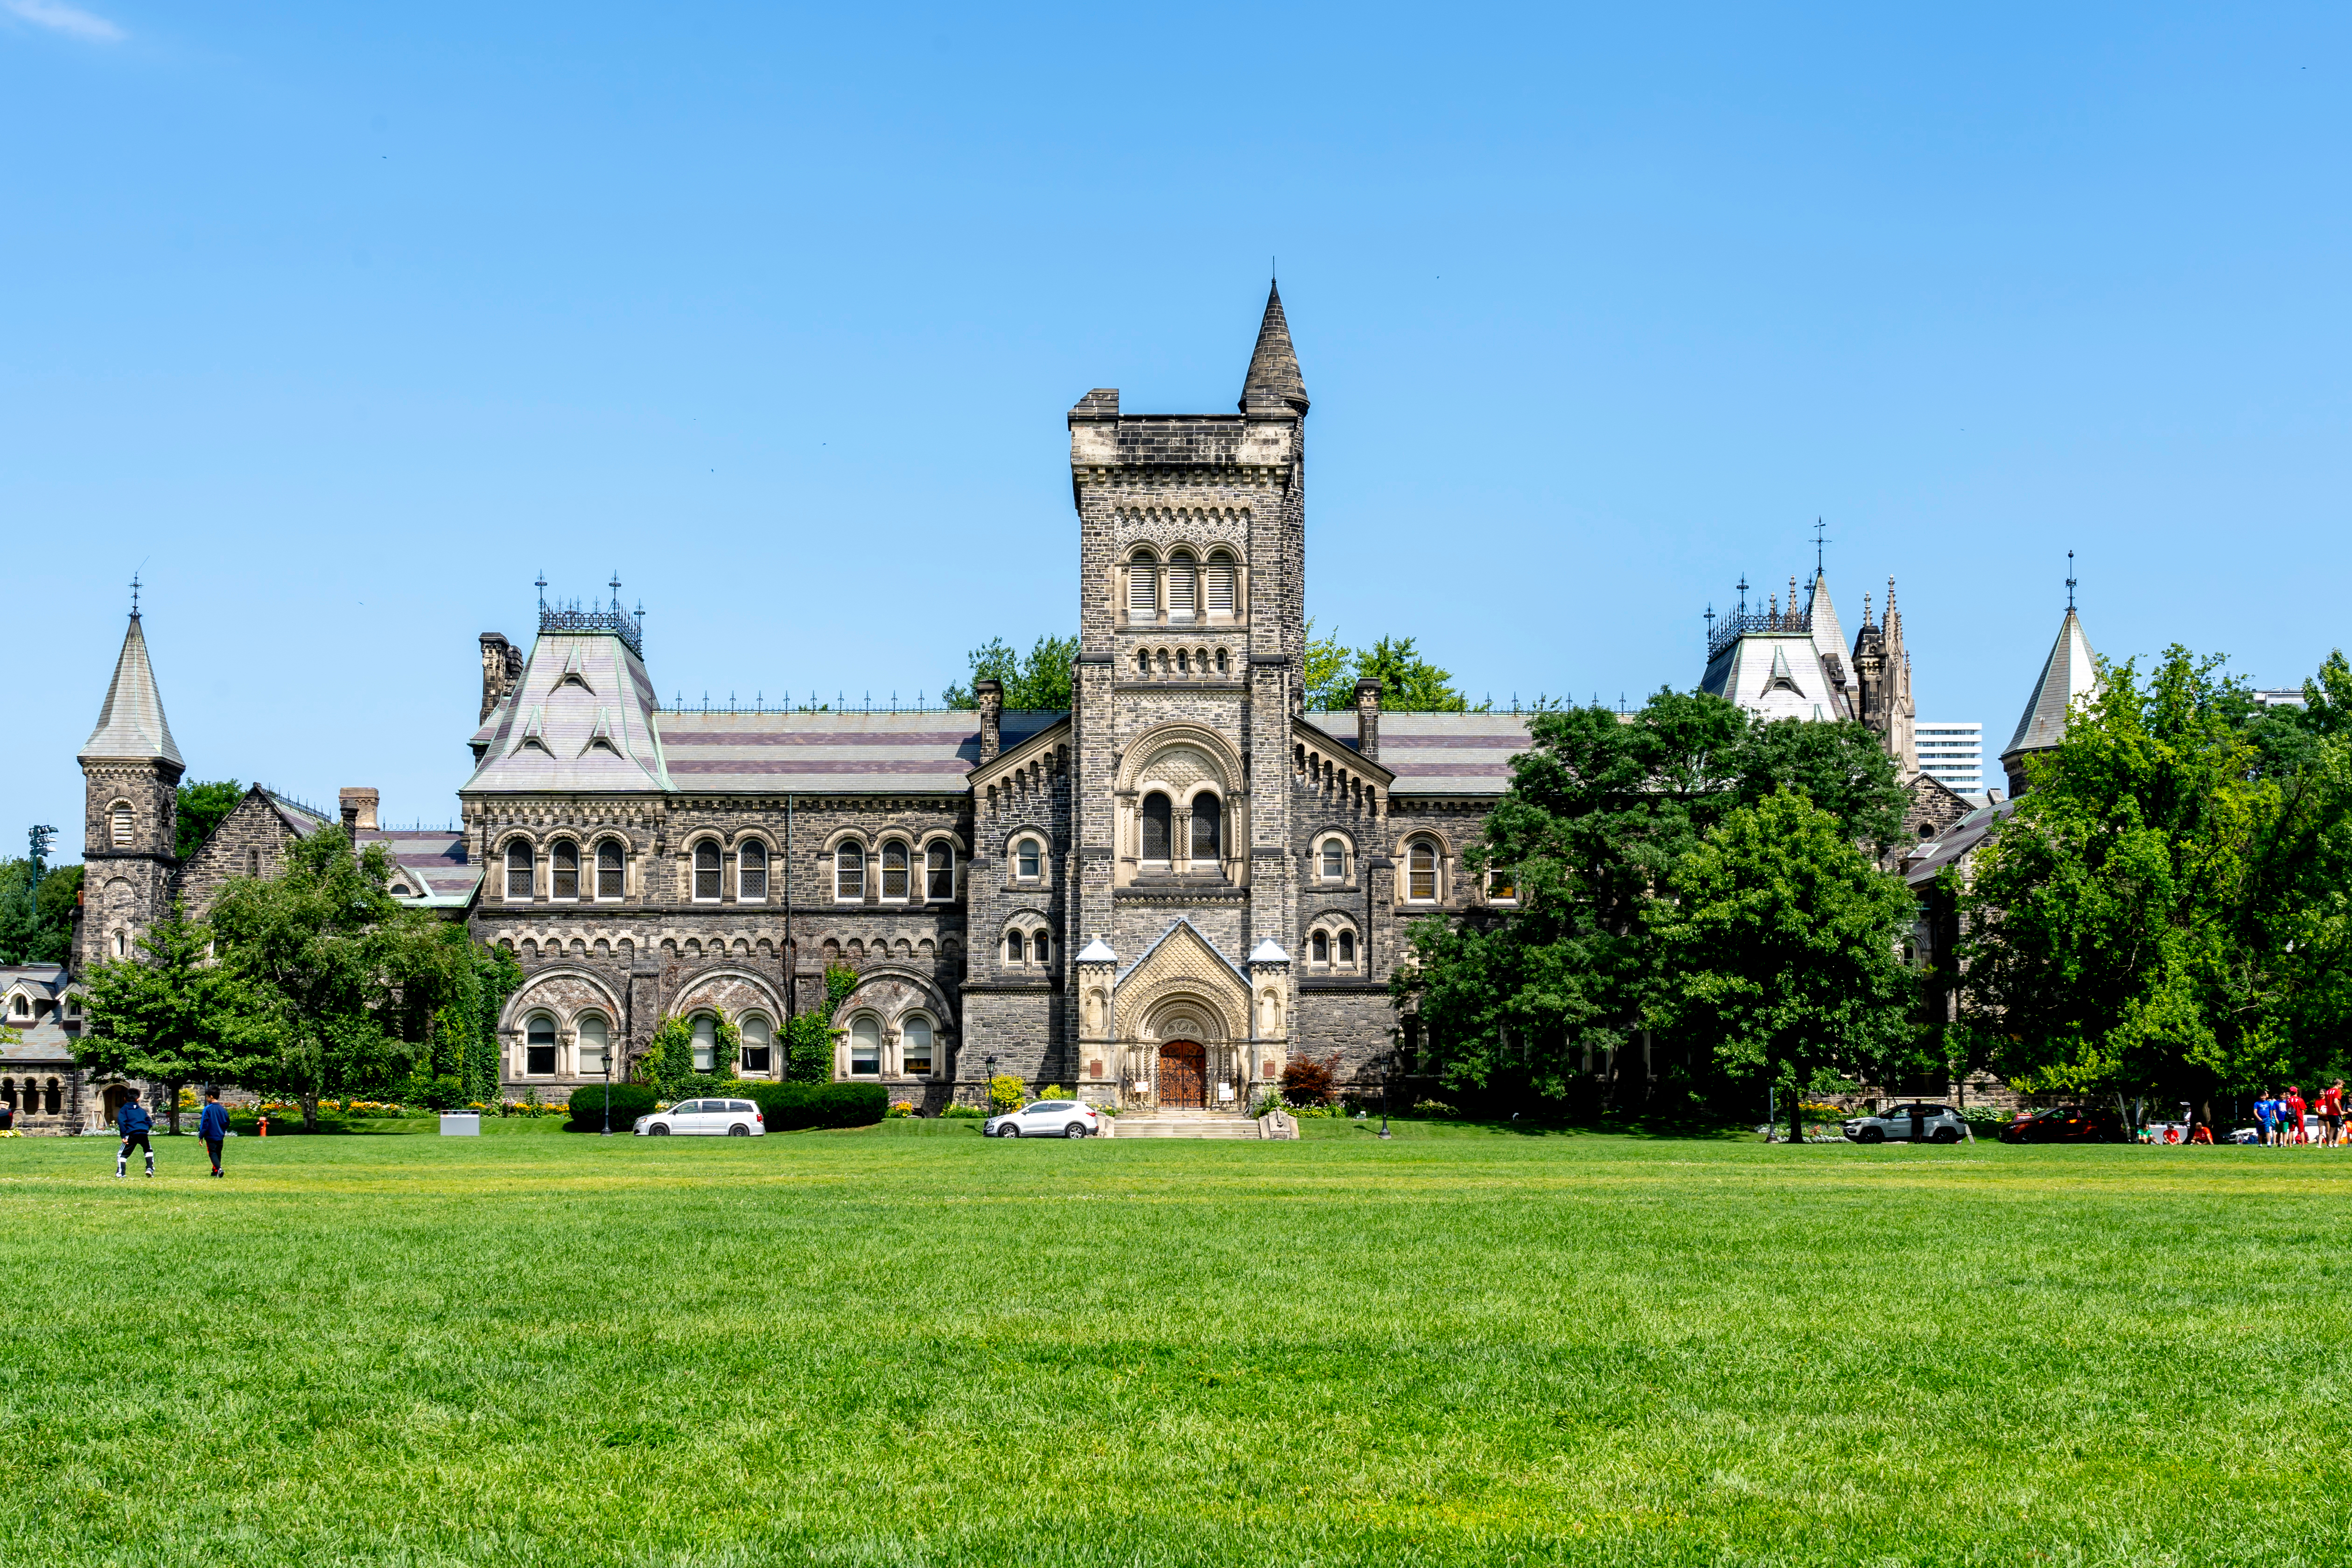 University of Toronto for Higher Education in Canada